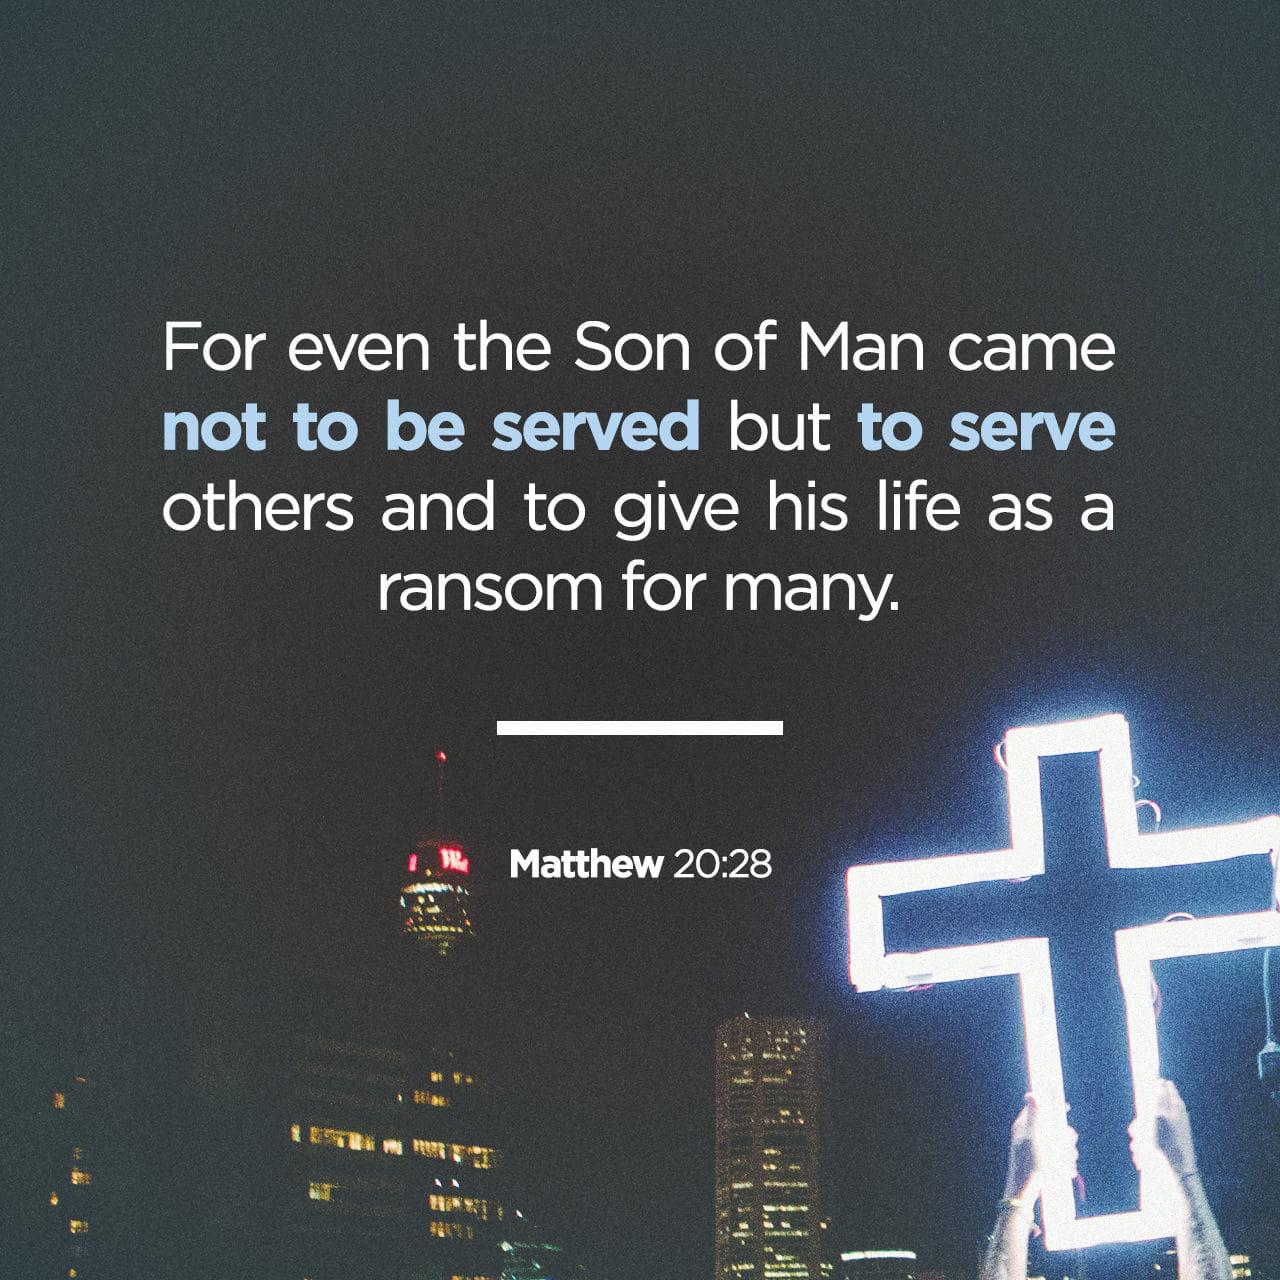 Bible Verse of the Day - day 85 - image 508 (Matthew 20:17-28)